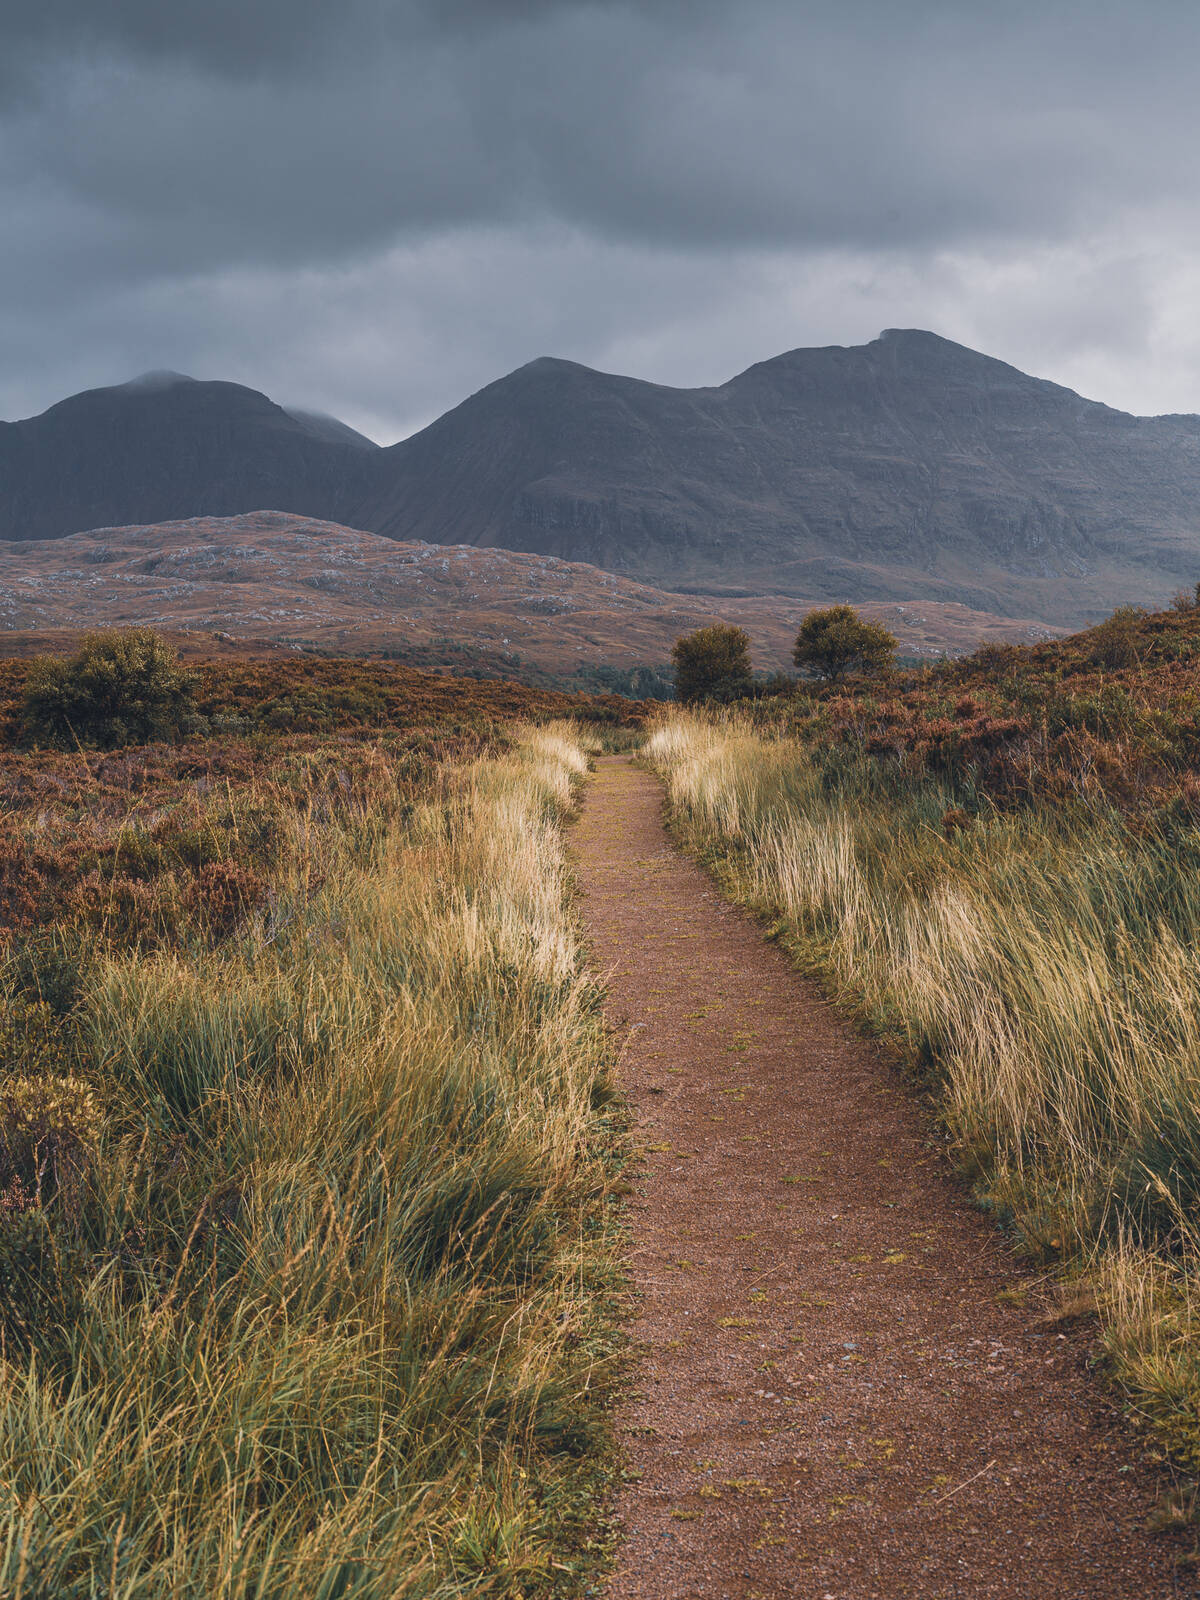 Image of Assynt all-abilities walk by James Billings.